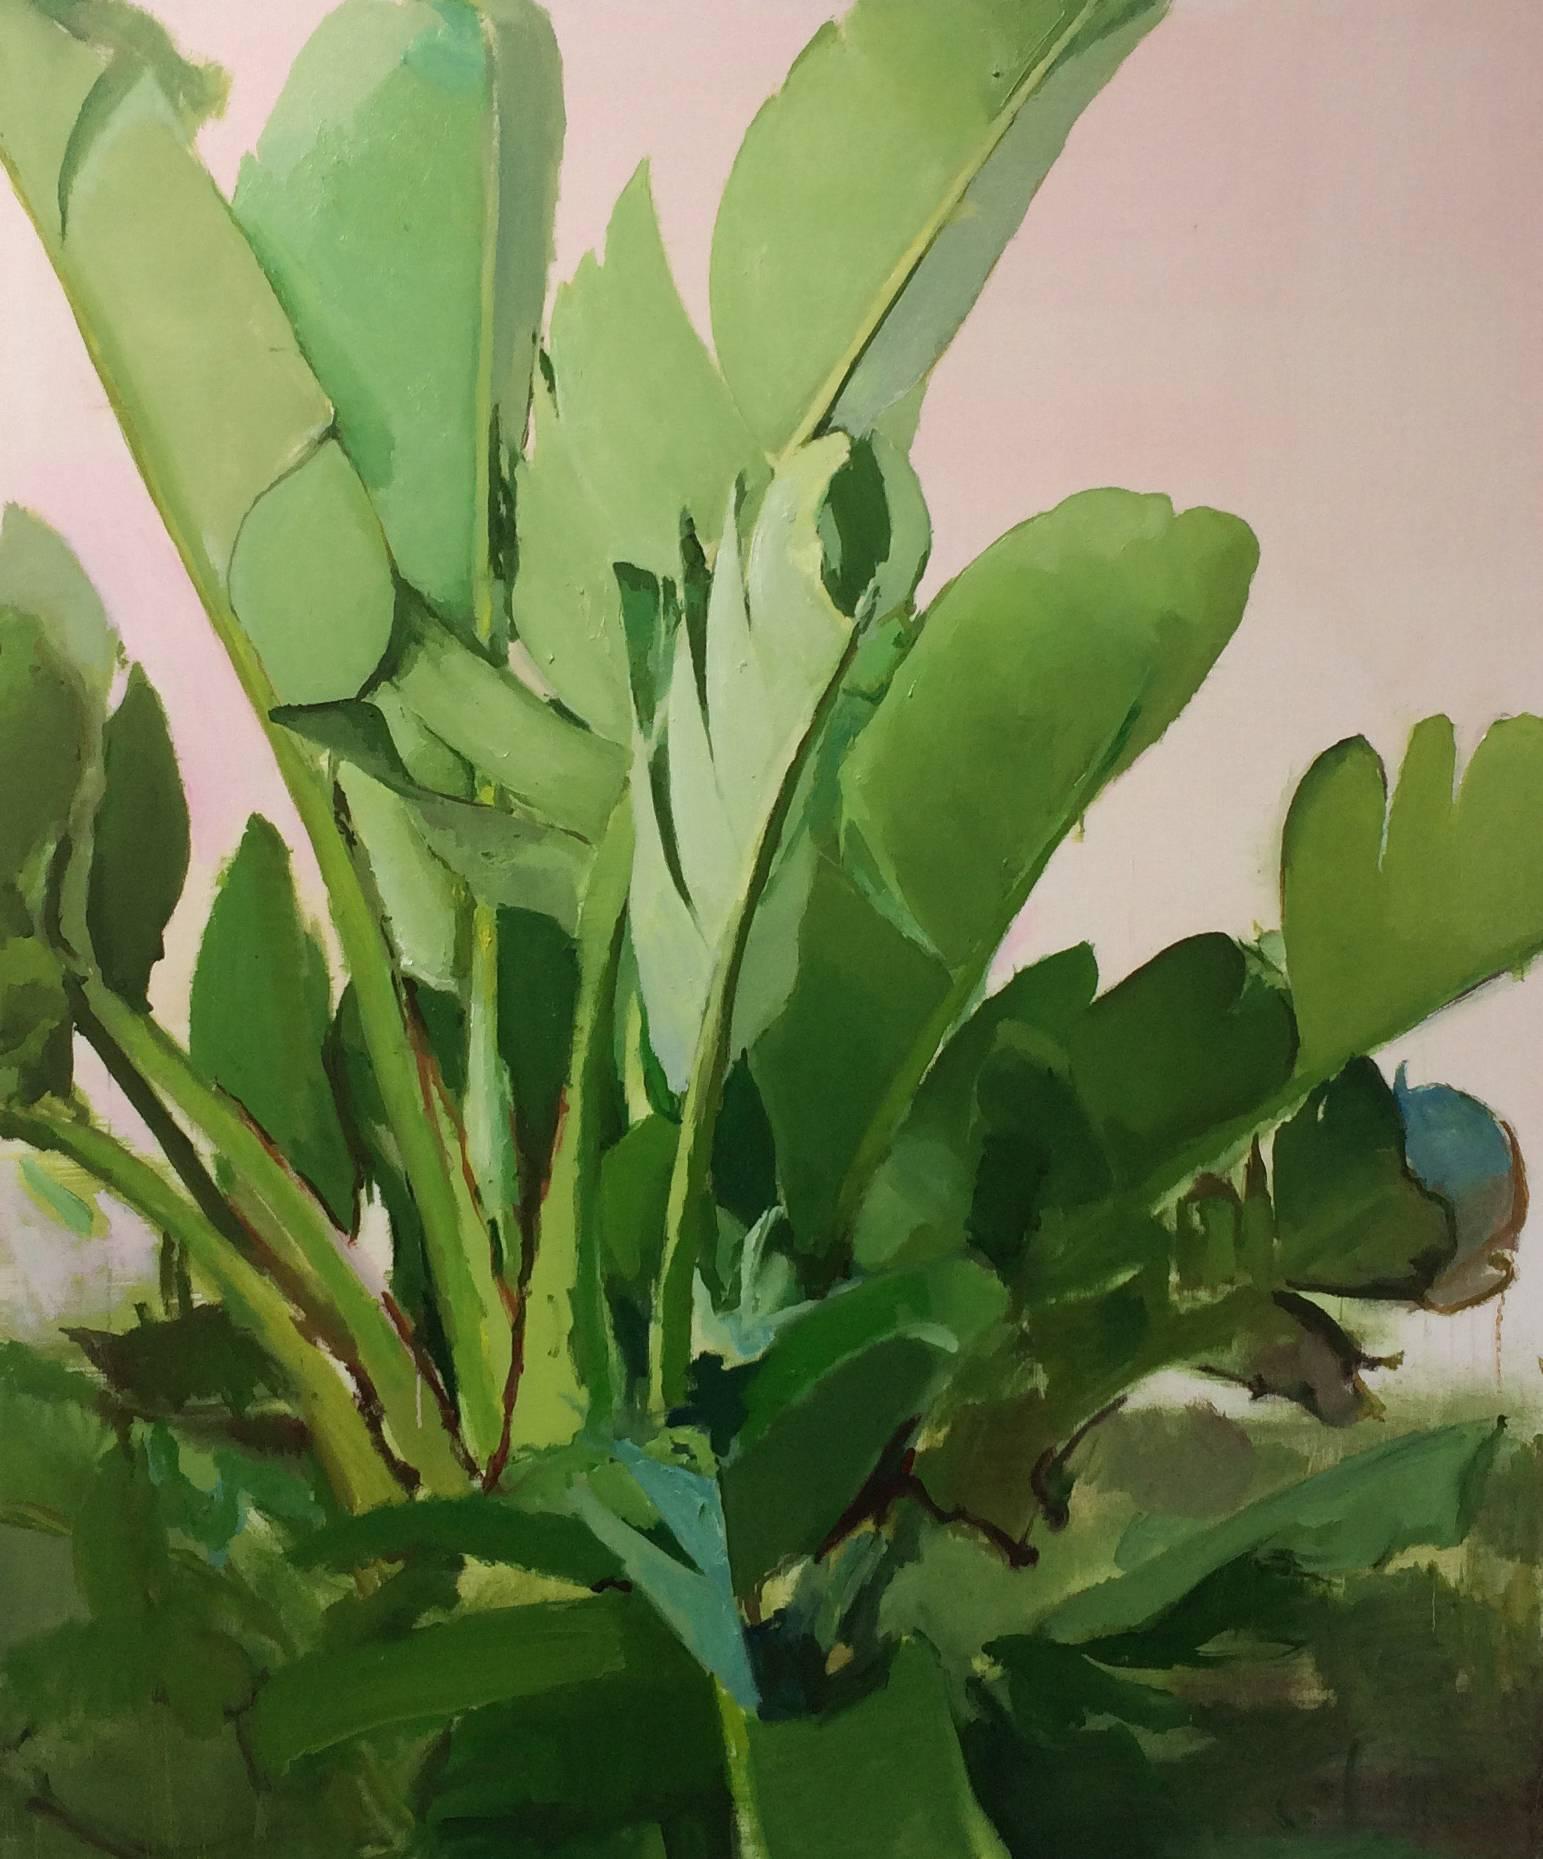 BEVERLY PALM #1 - Painting by Michael Harnish